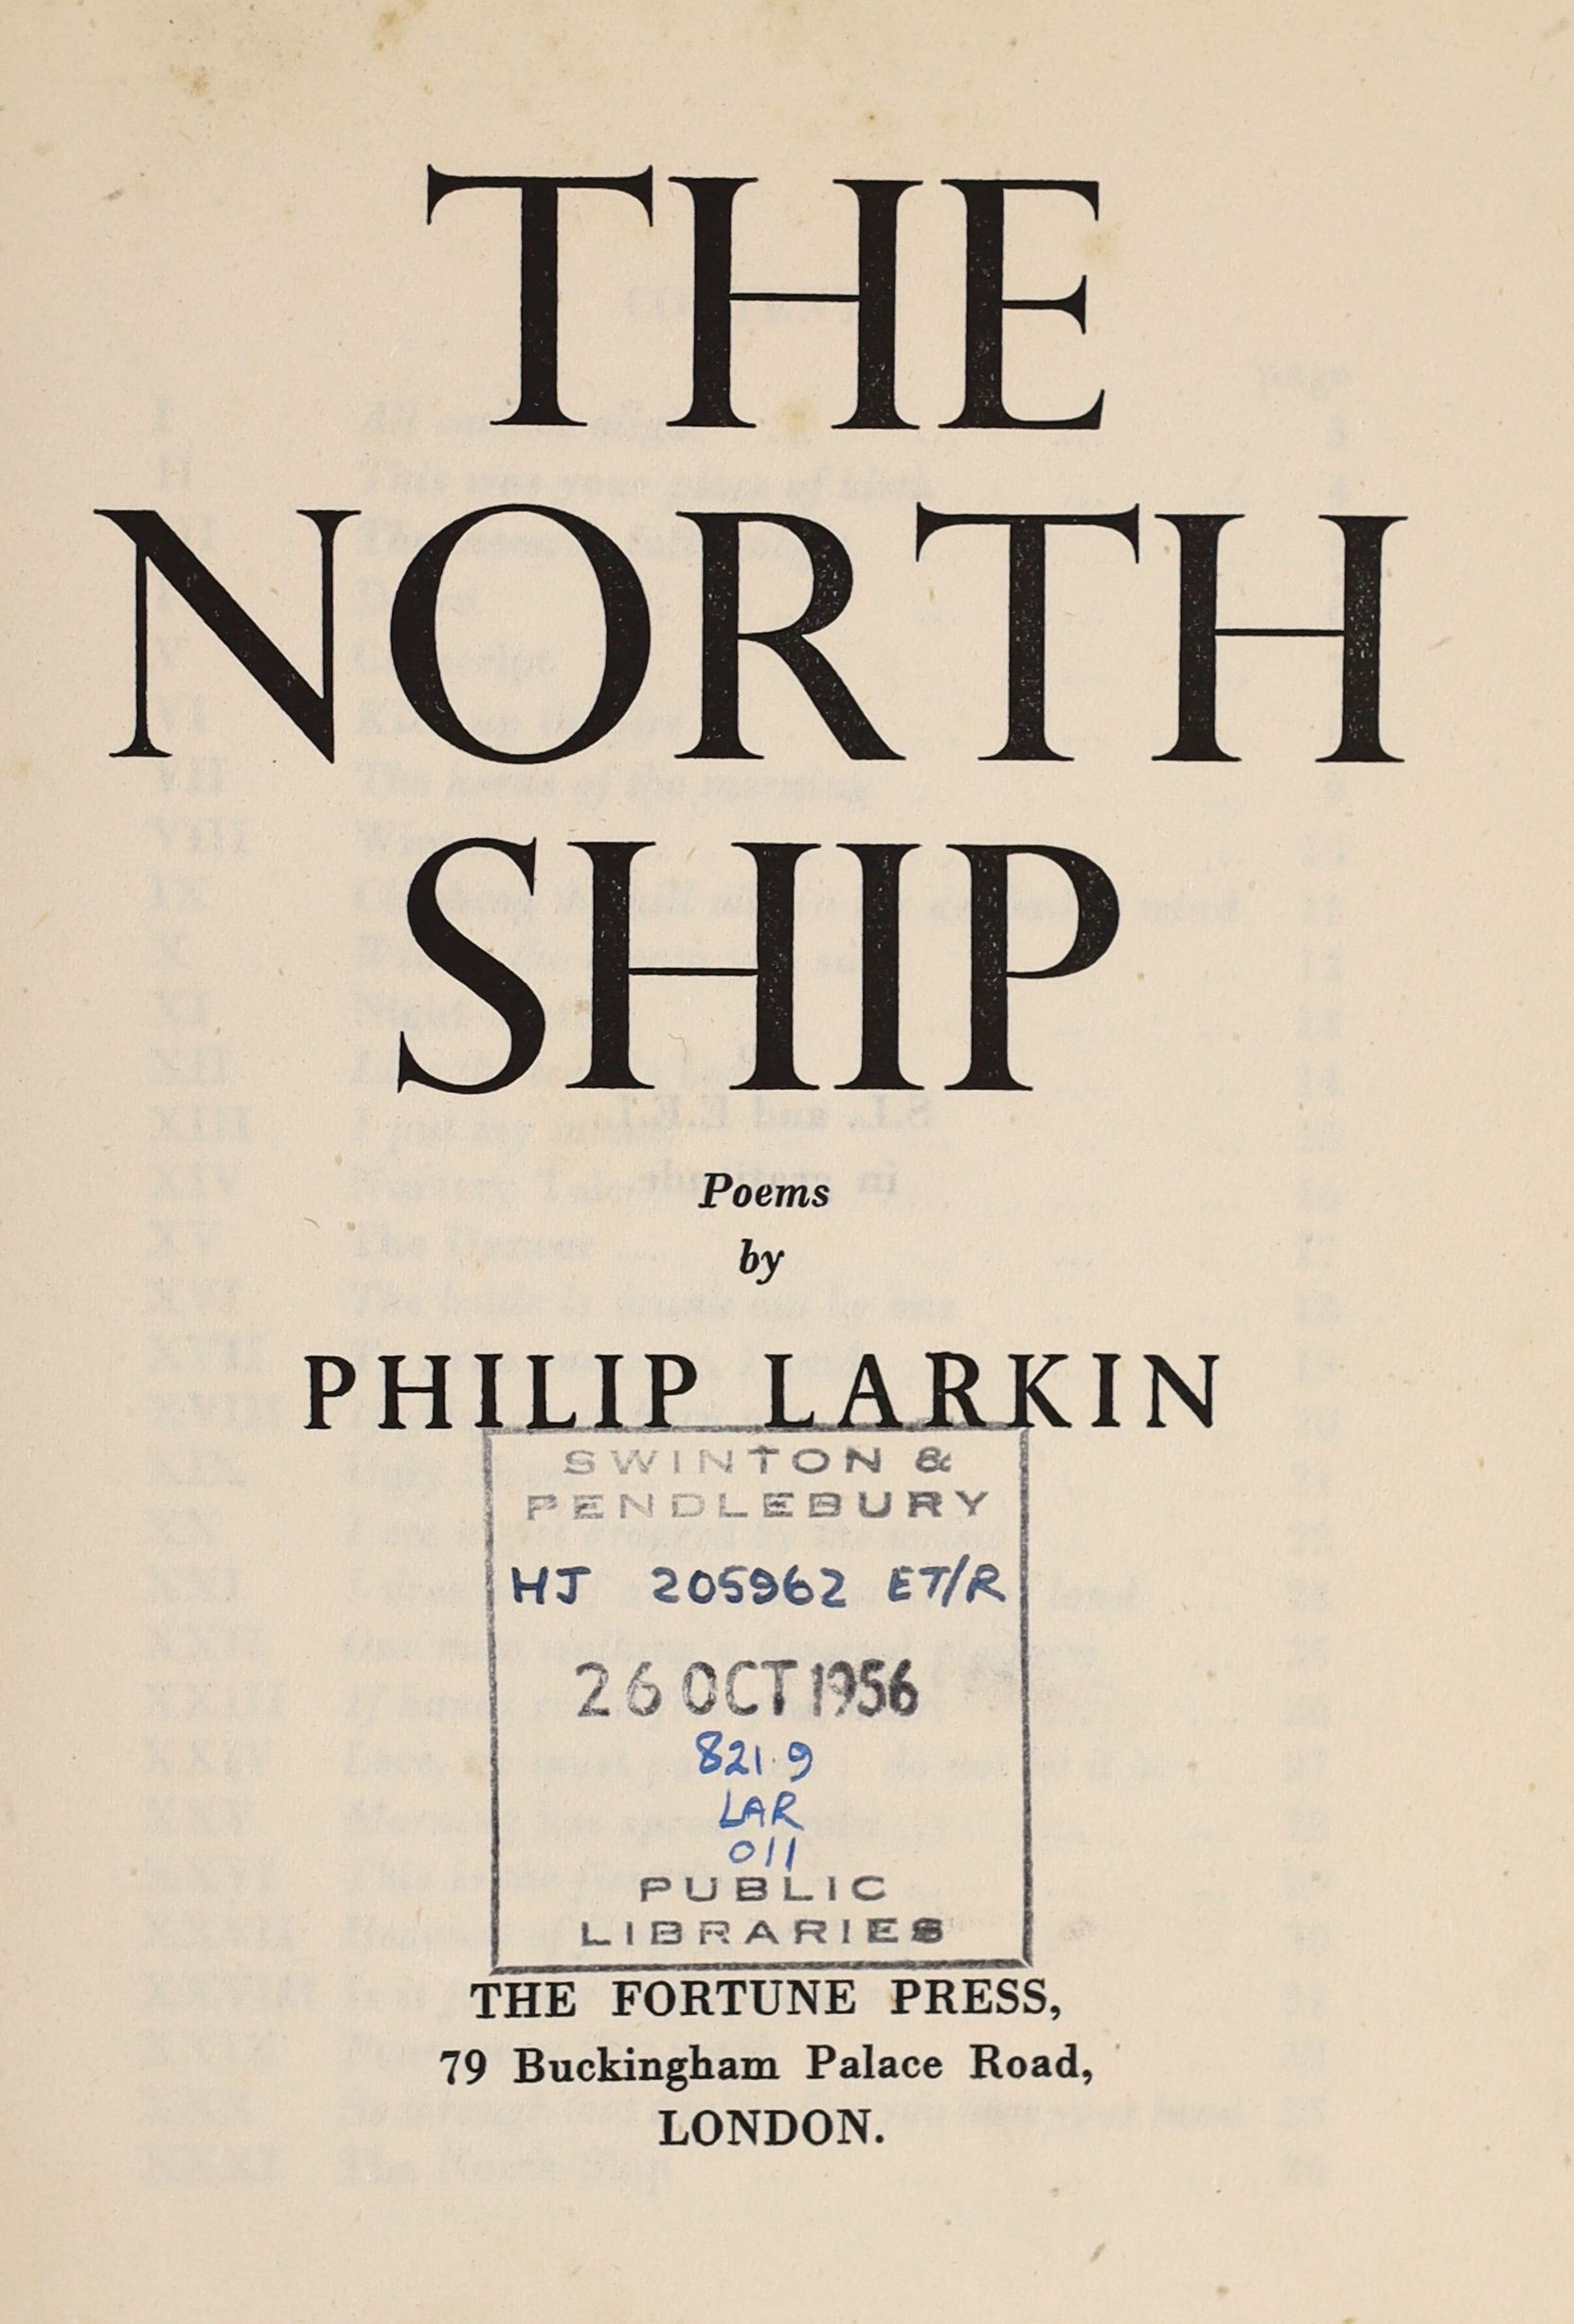 Larkin, Philip - The North Ship. 1st ed. Ex-library copy. Original black cloth with gilt letters on spine. Half title and dedication. Thin 8vo. The Fortune Press, London, 1945.